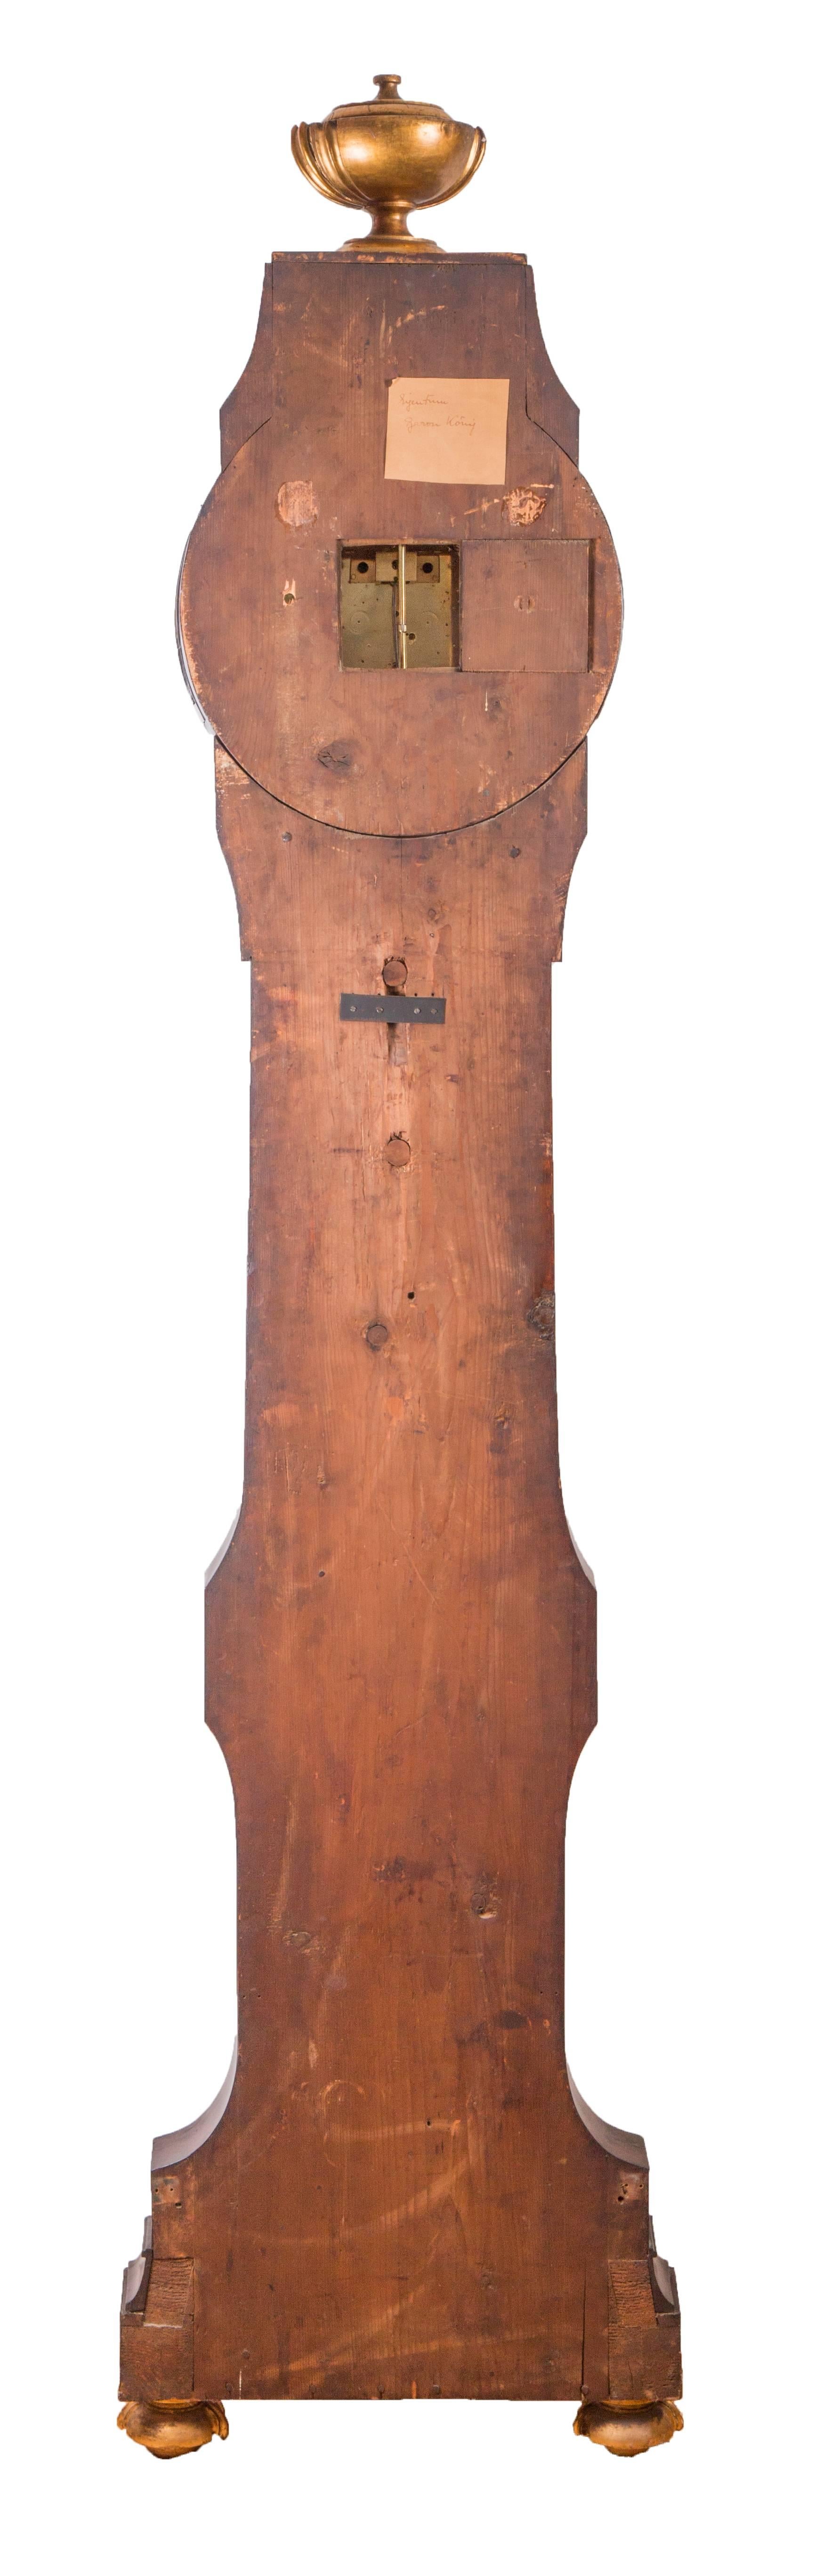 Late 18th Century Classicistical Longcase Clock by Seiffner, Budapest, circa 1795 For Sale